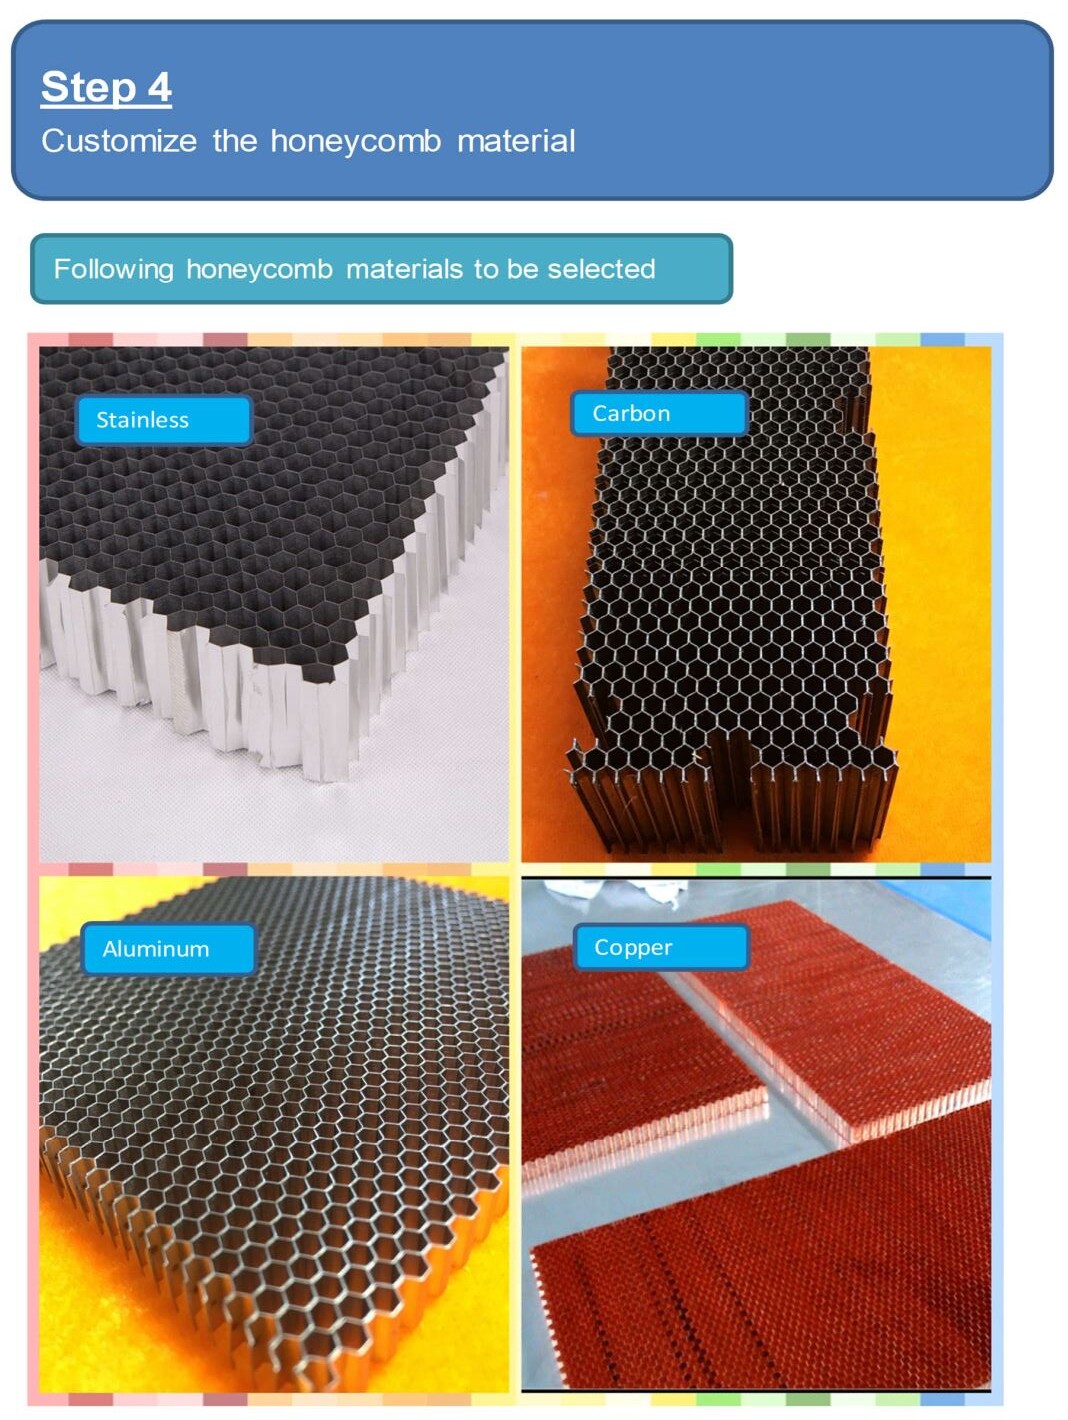 Step 4 of getting price faster of honeycomb shielding vent